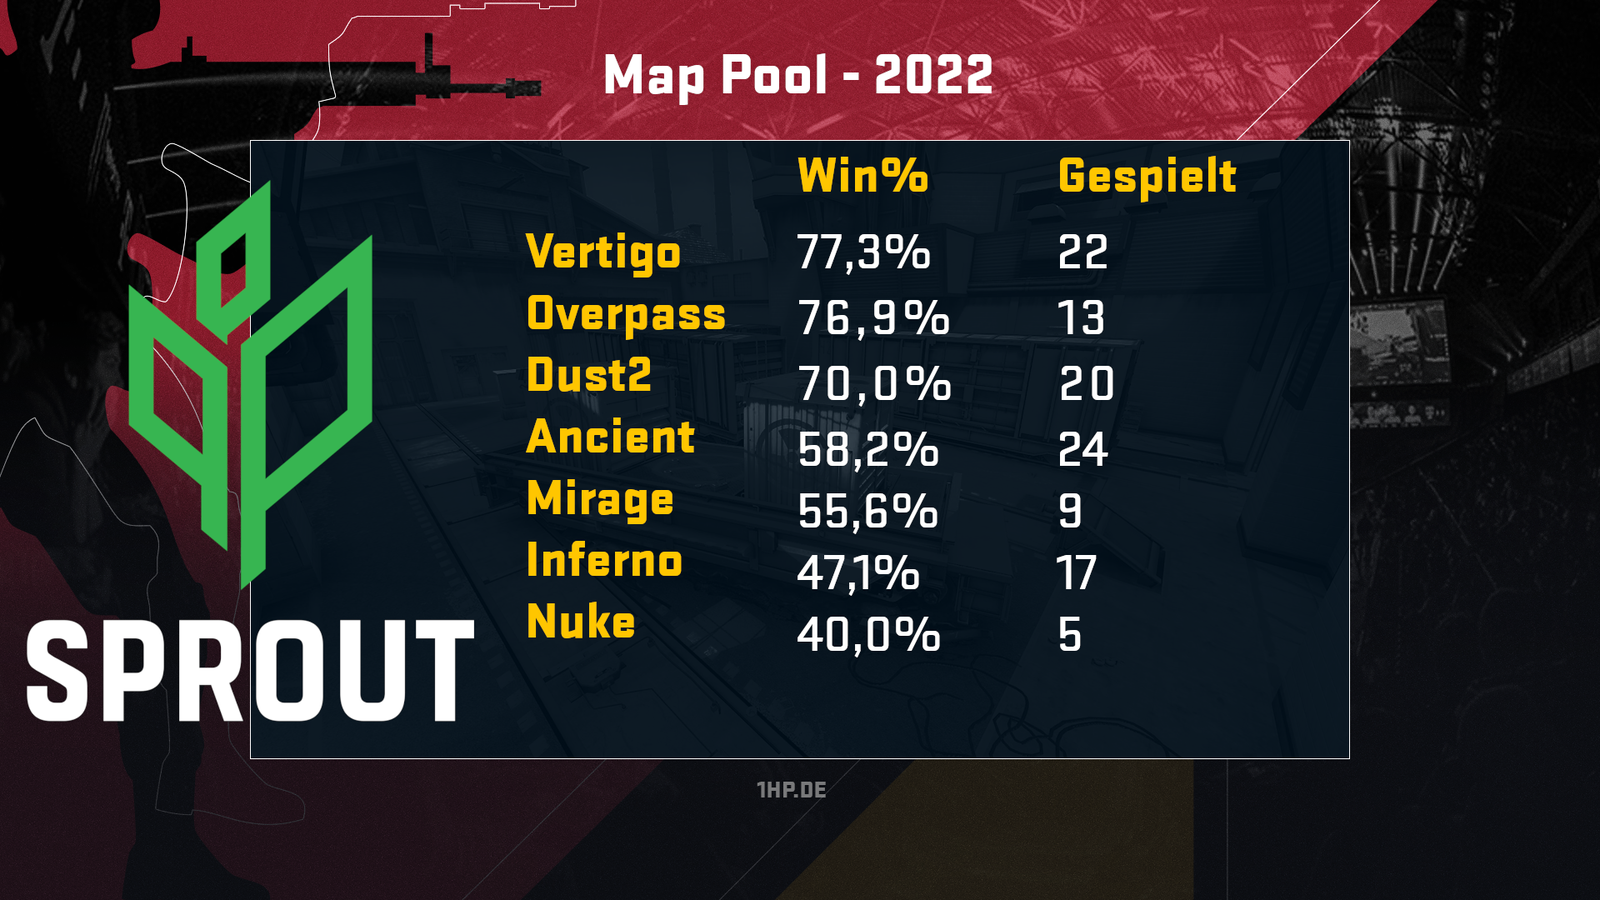 Sprout-Map-Pool-2022